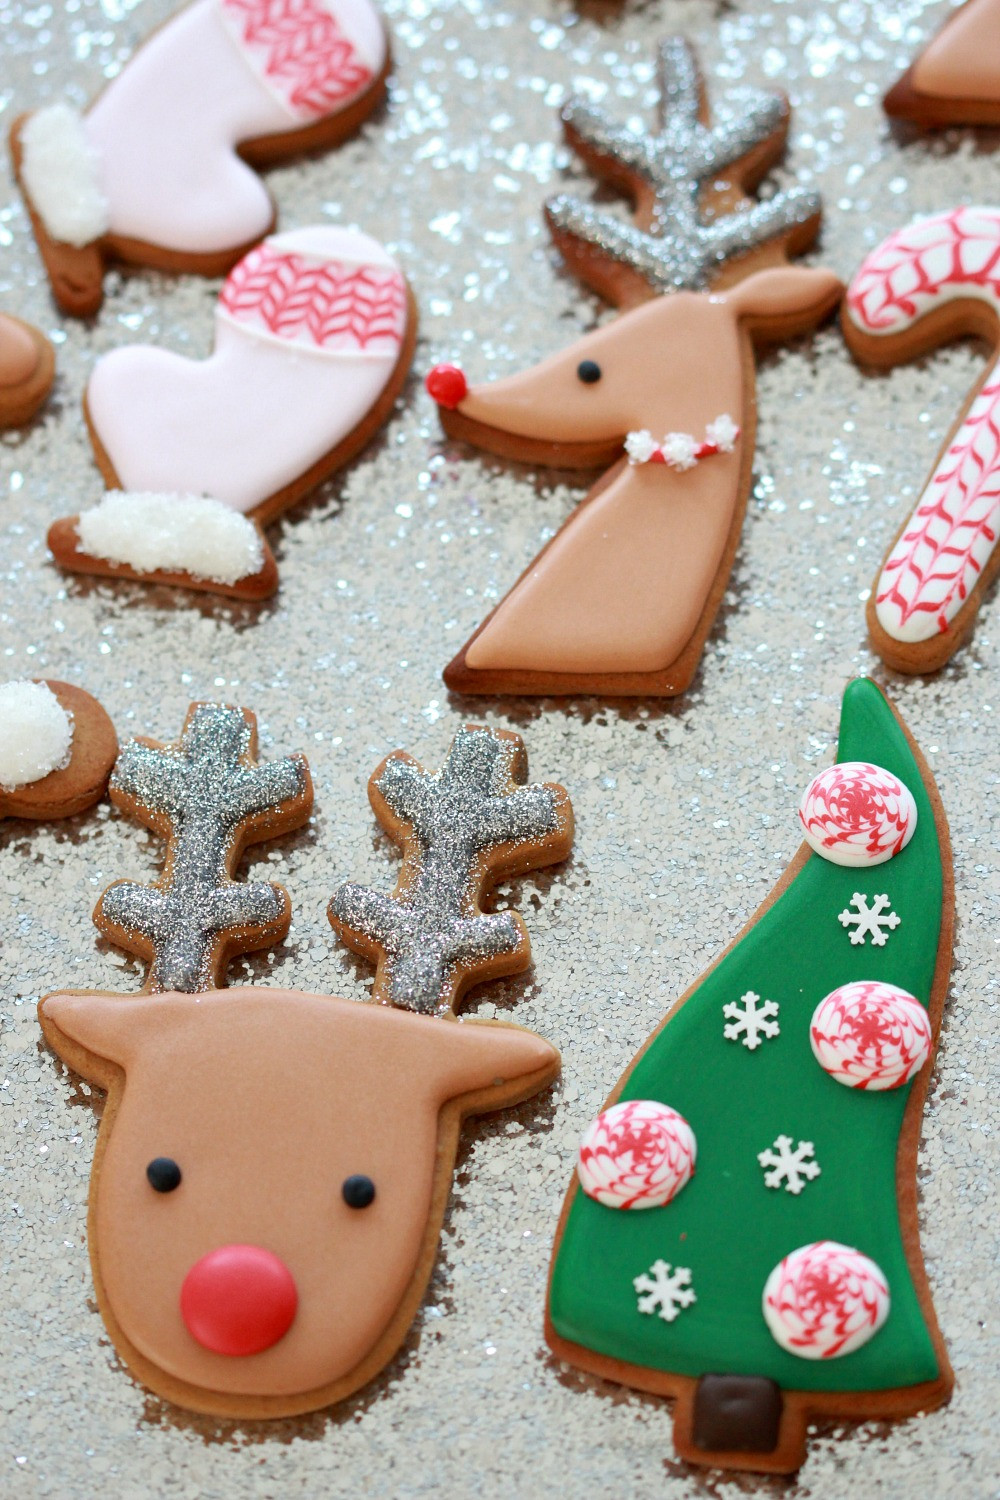 Pictures Of Christmas Cookies Decorated
 Video How to Decorate Christmas Cookies Simple Designs